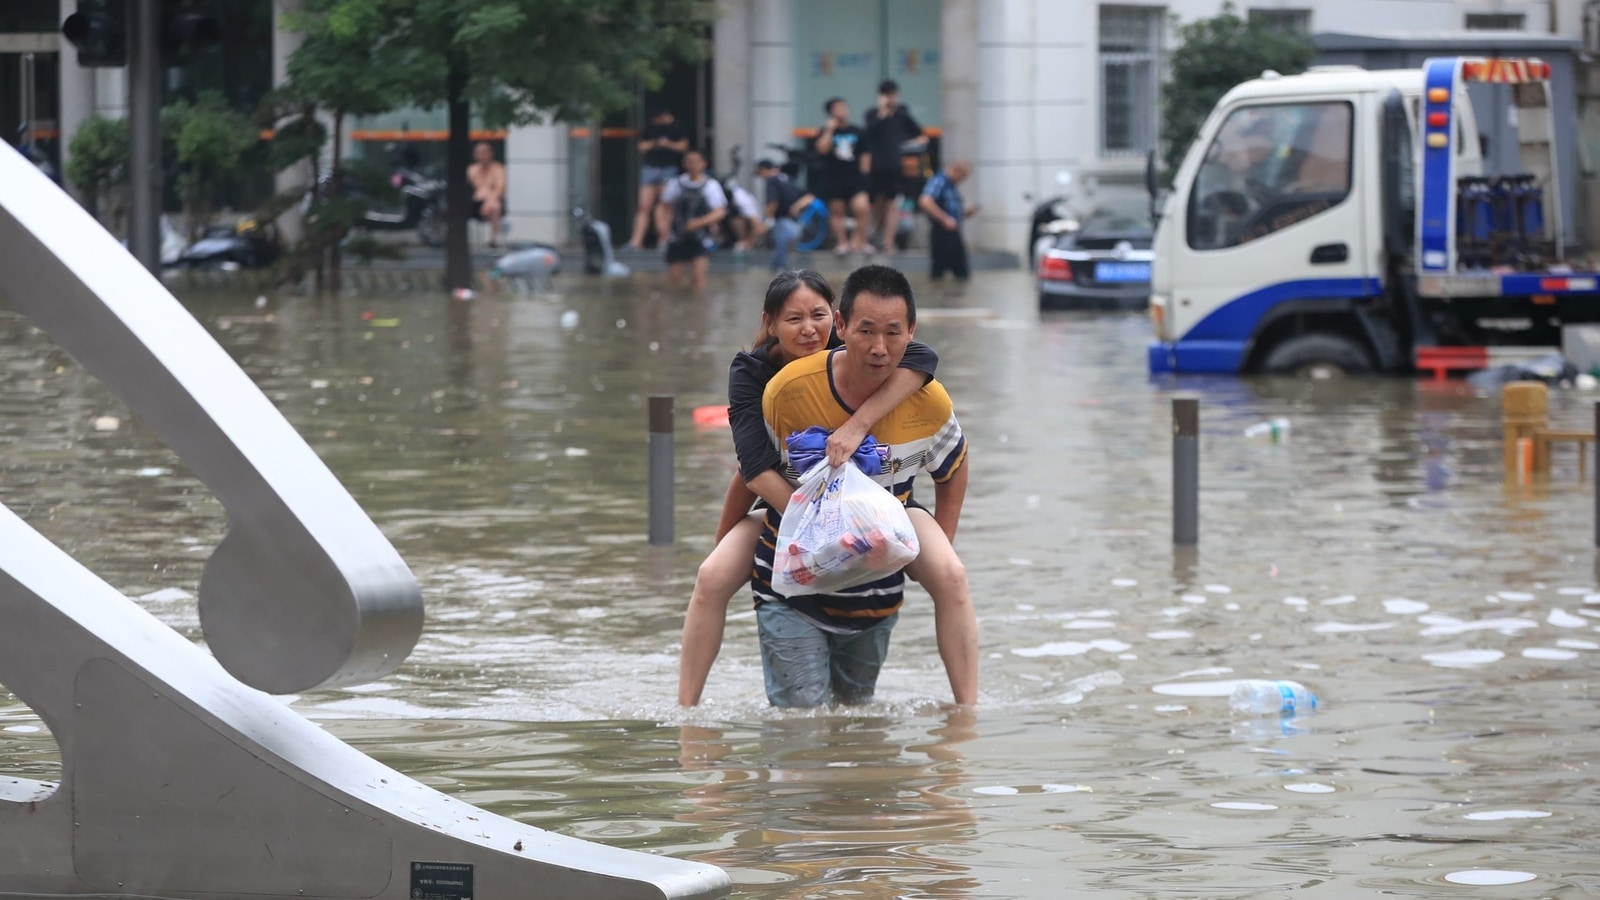 Was awaiting death: Survivors share details of being stuck on China subway flood | World News